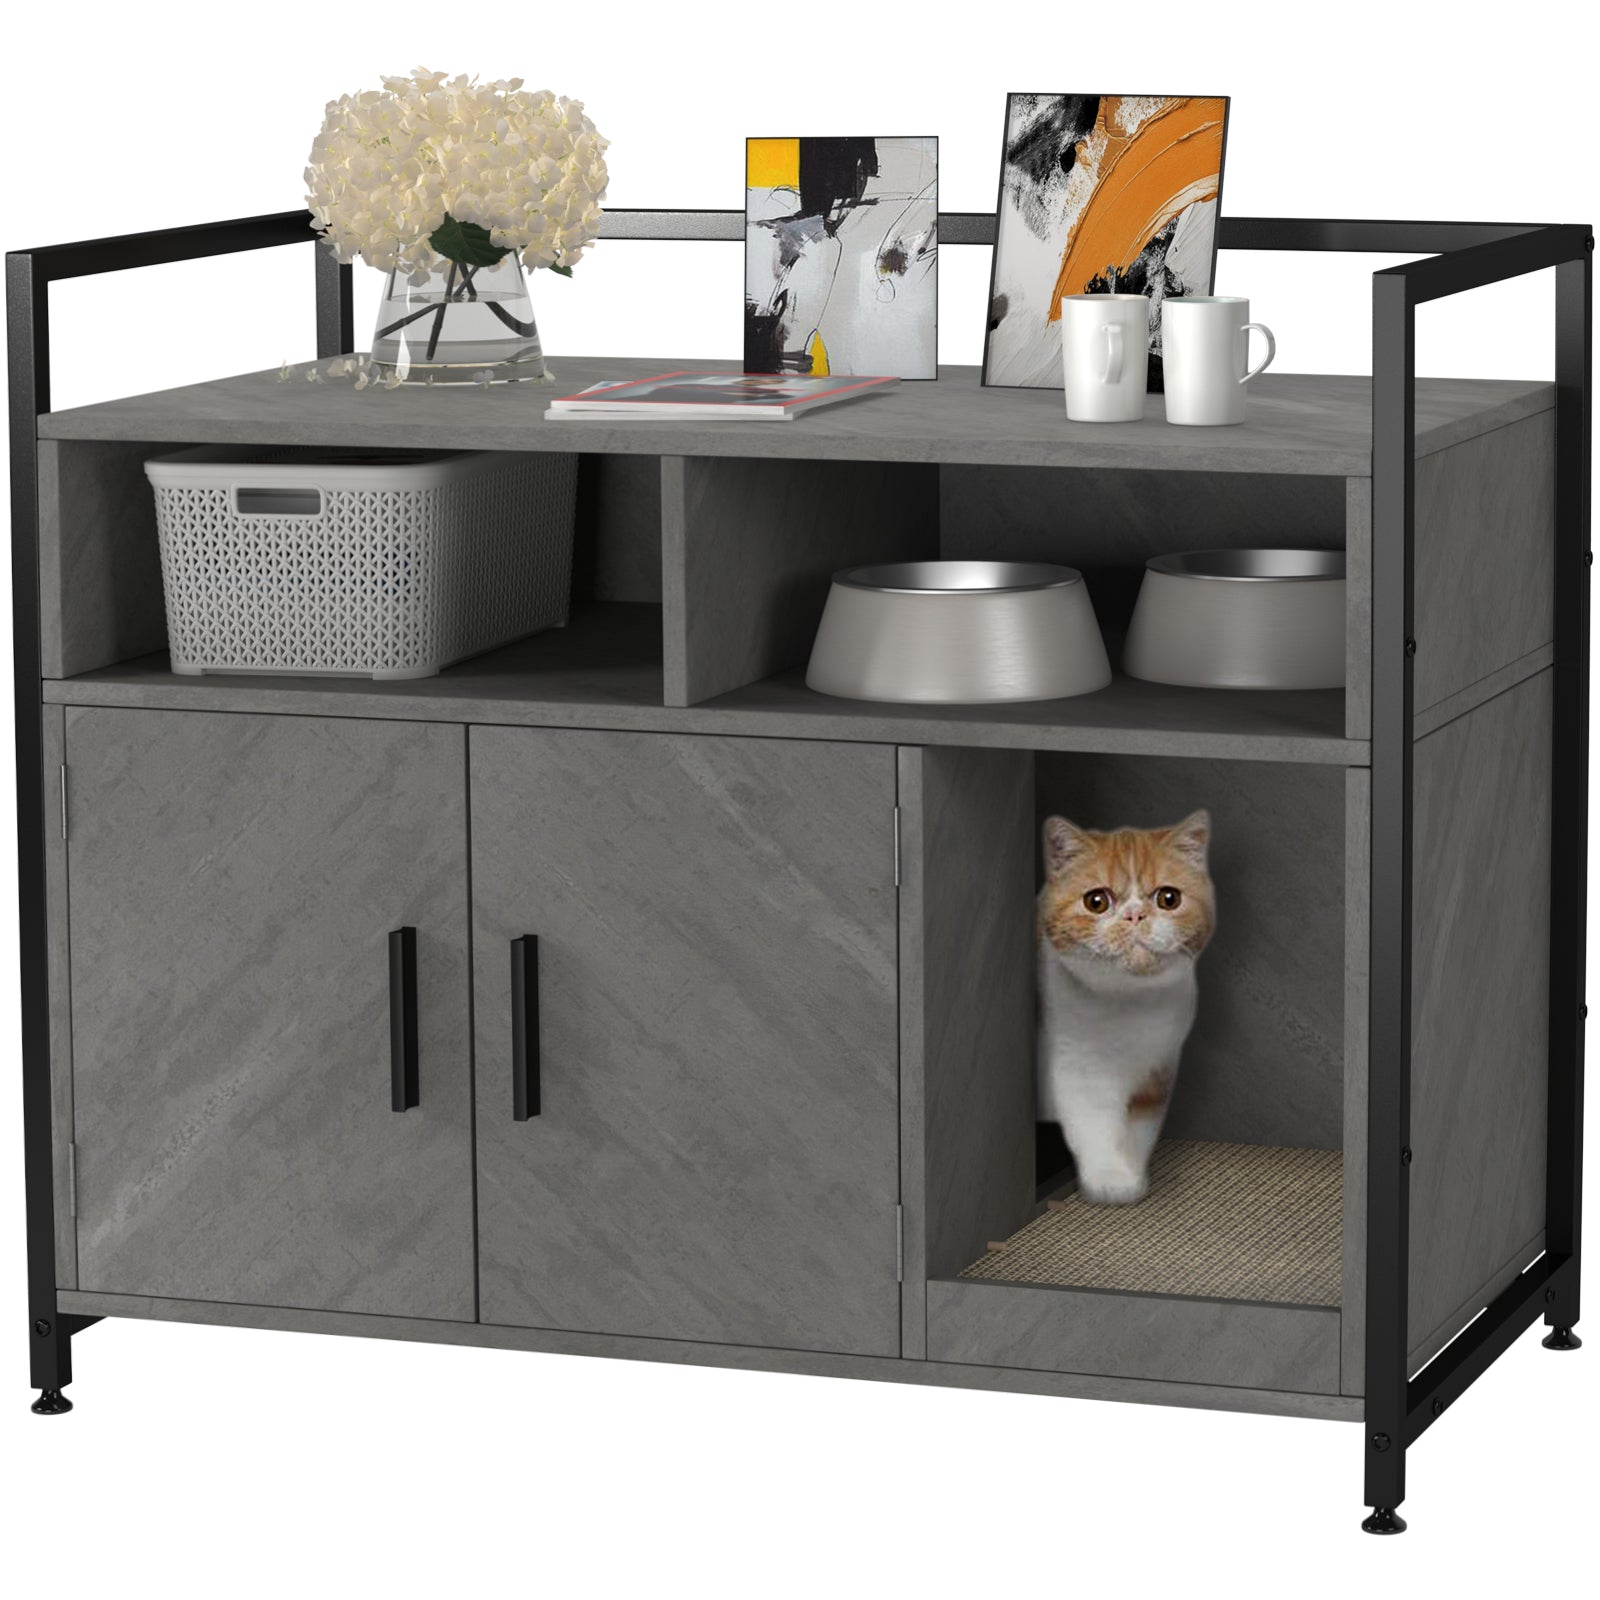  Jvscko Cat Litter Box Enclosures with Cat-Shaped